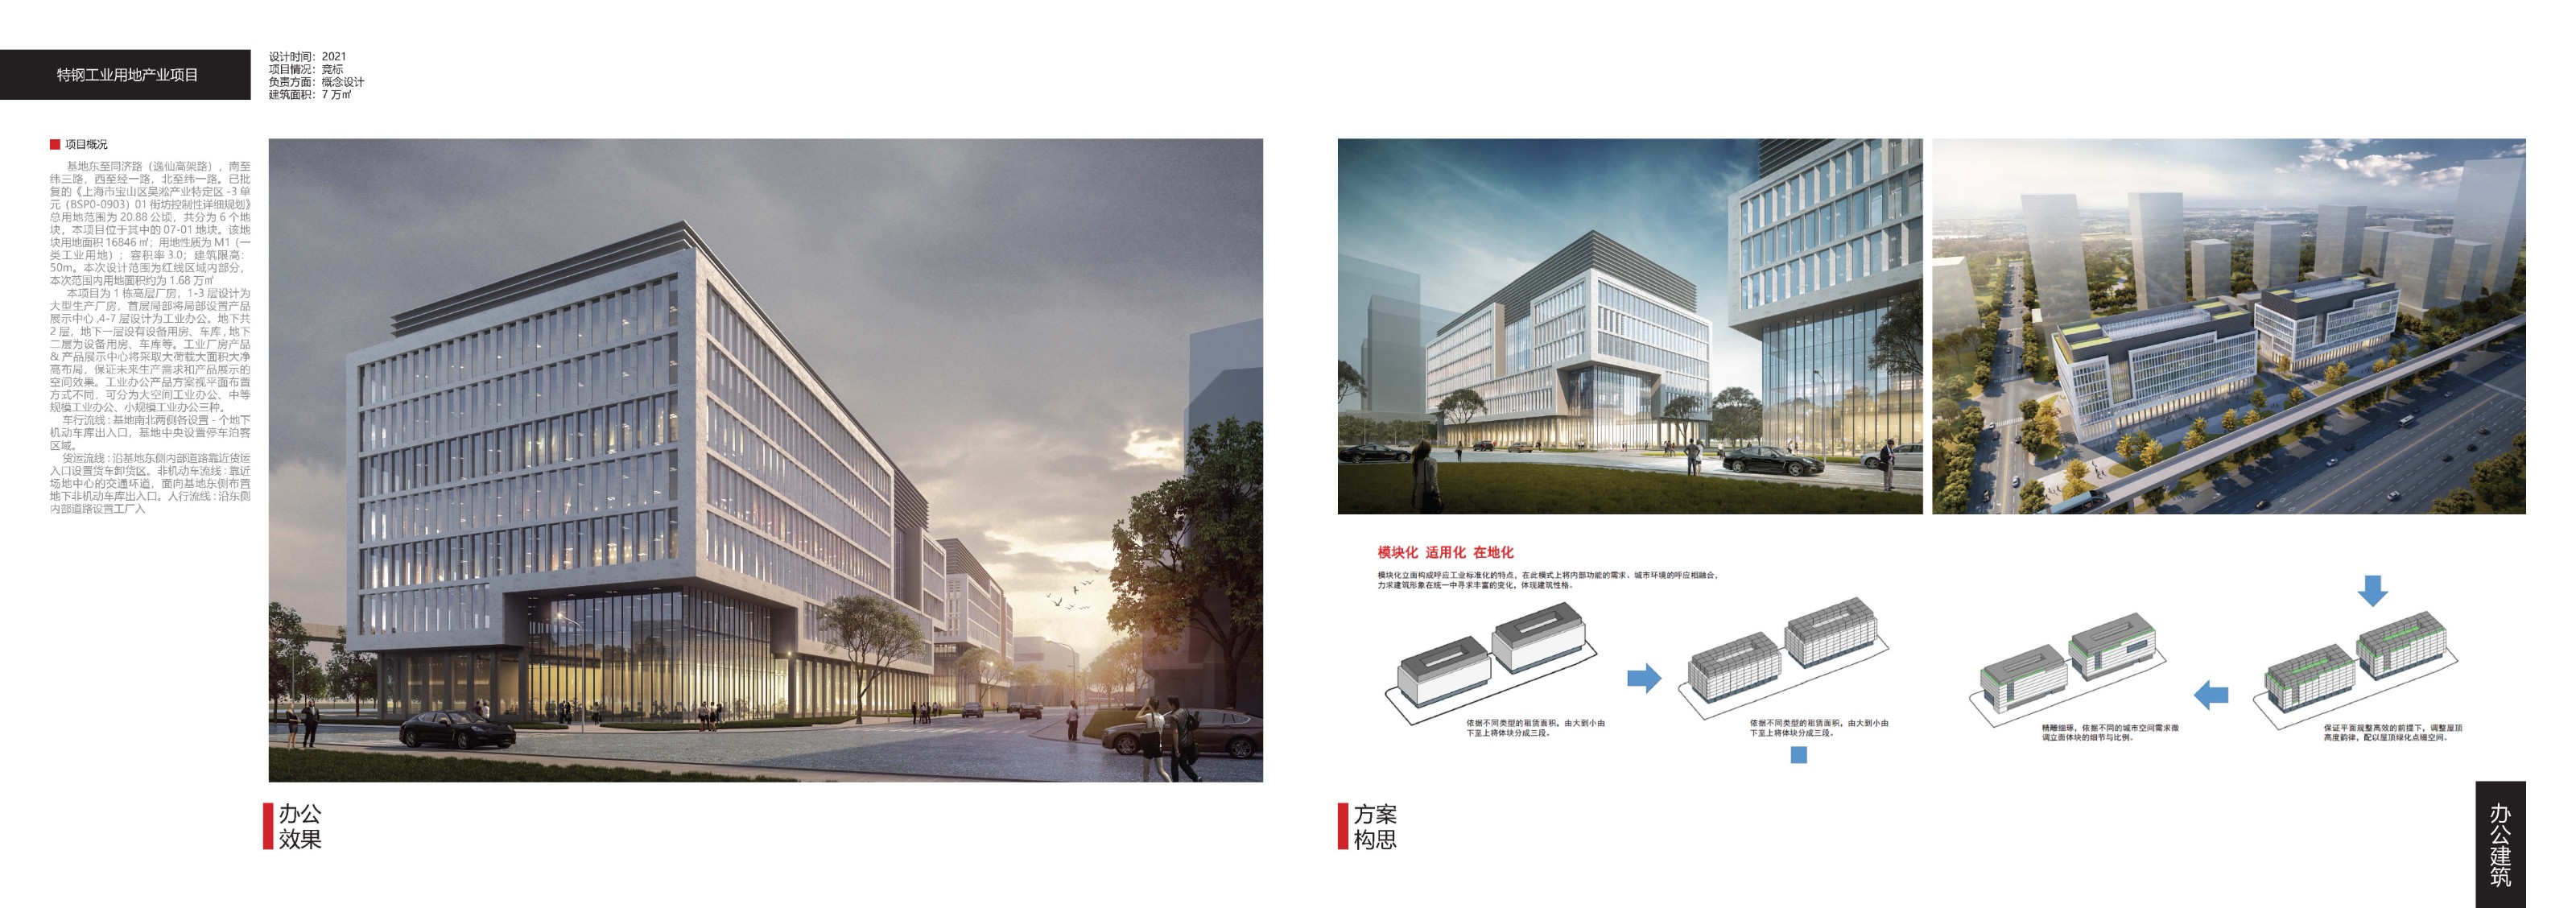 2011-2021-Architecture-Projects_页面_08.jpg